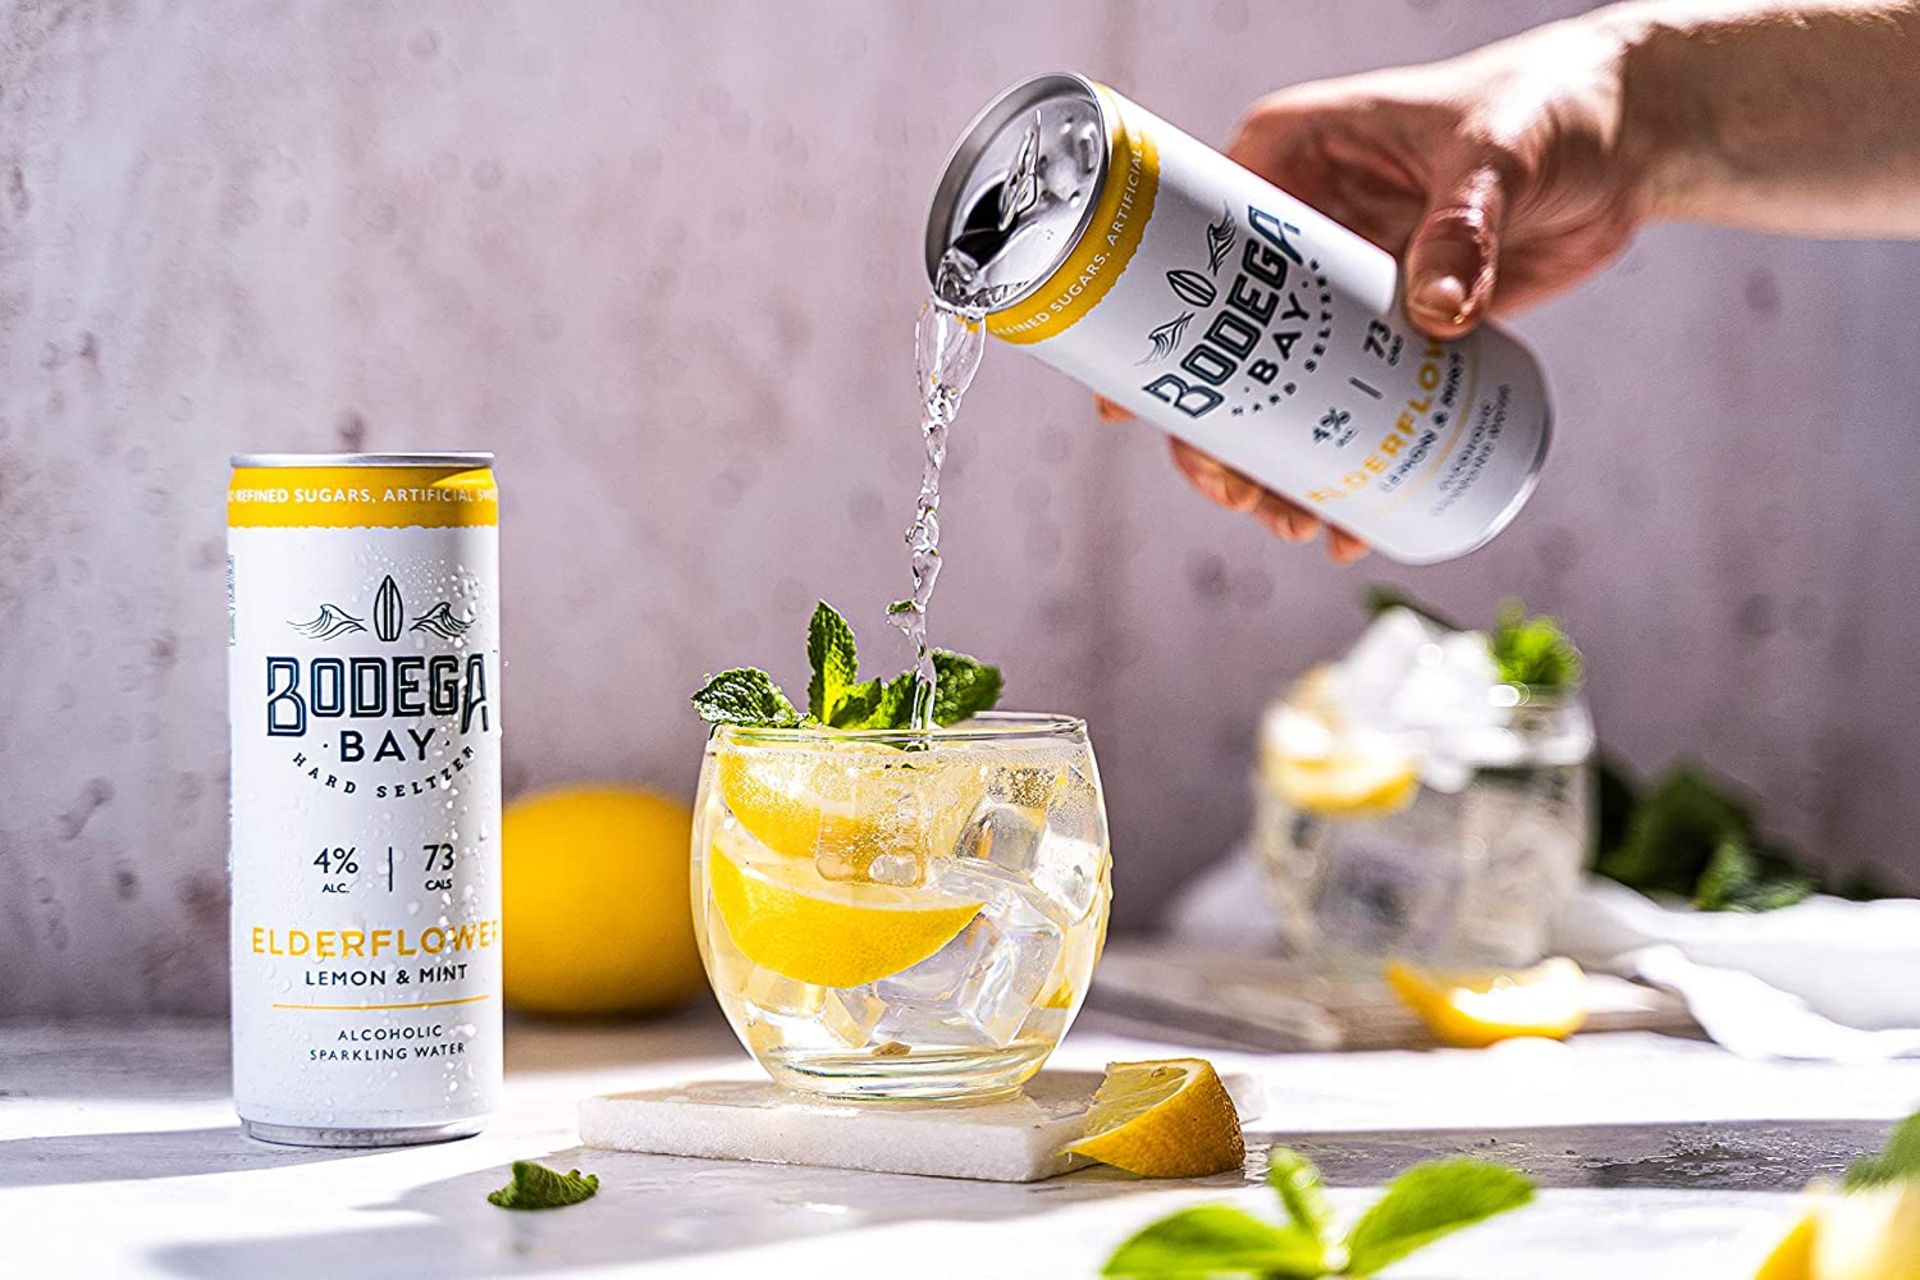 360 x Cans of Bodega Bay Hard Seltzer 250ml Alcoholic Sparkling Water Drinks - Various Flavours - Image 14 of 20